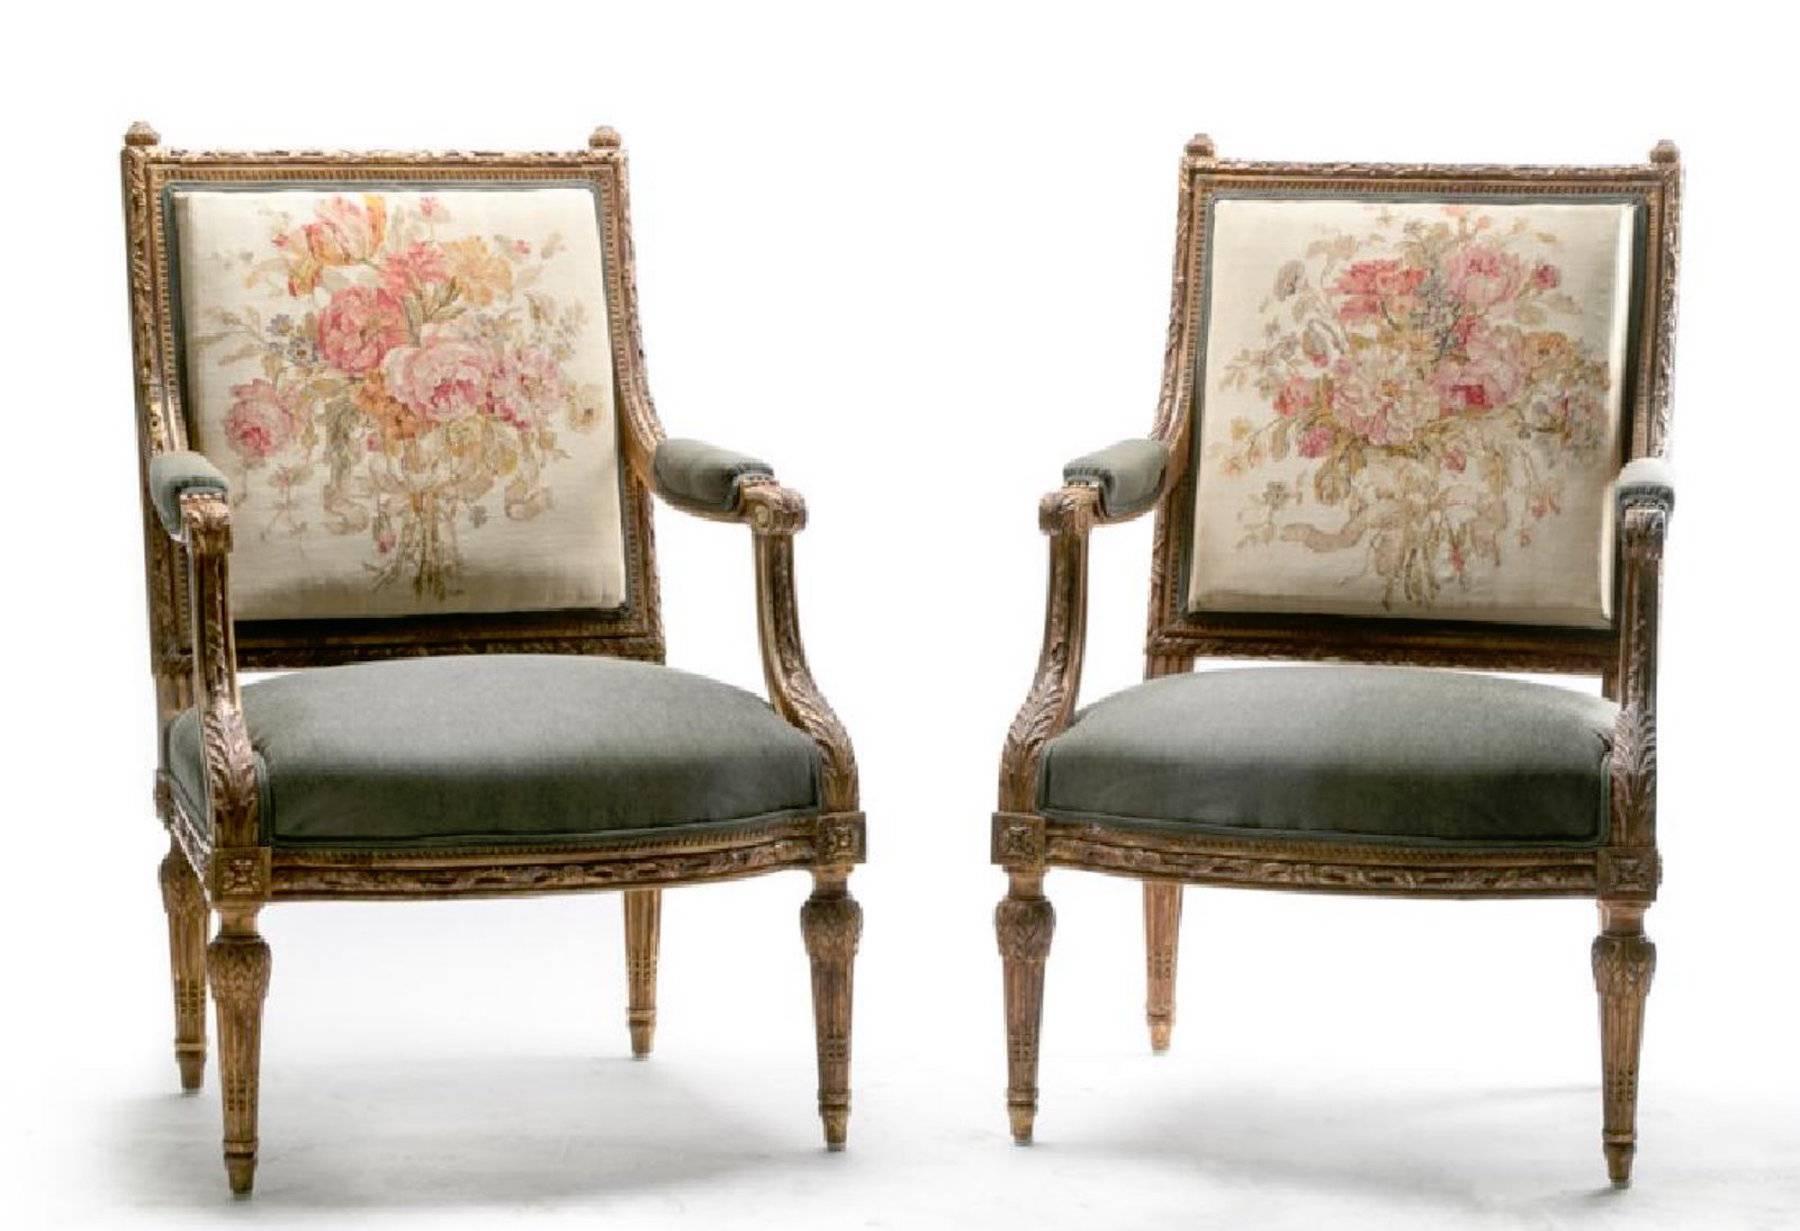 A pair of fauteuil a la Reine, with finely carved giltwood neoclassic frames. The back rest with handwoven Aubusson tapestry, the seats, arm rests and the backs are all newly upholstered in a custom silk wool blend.

